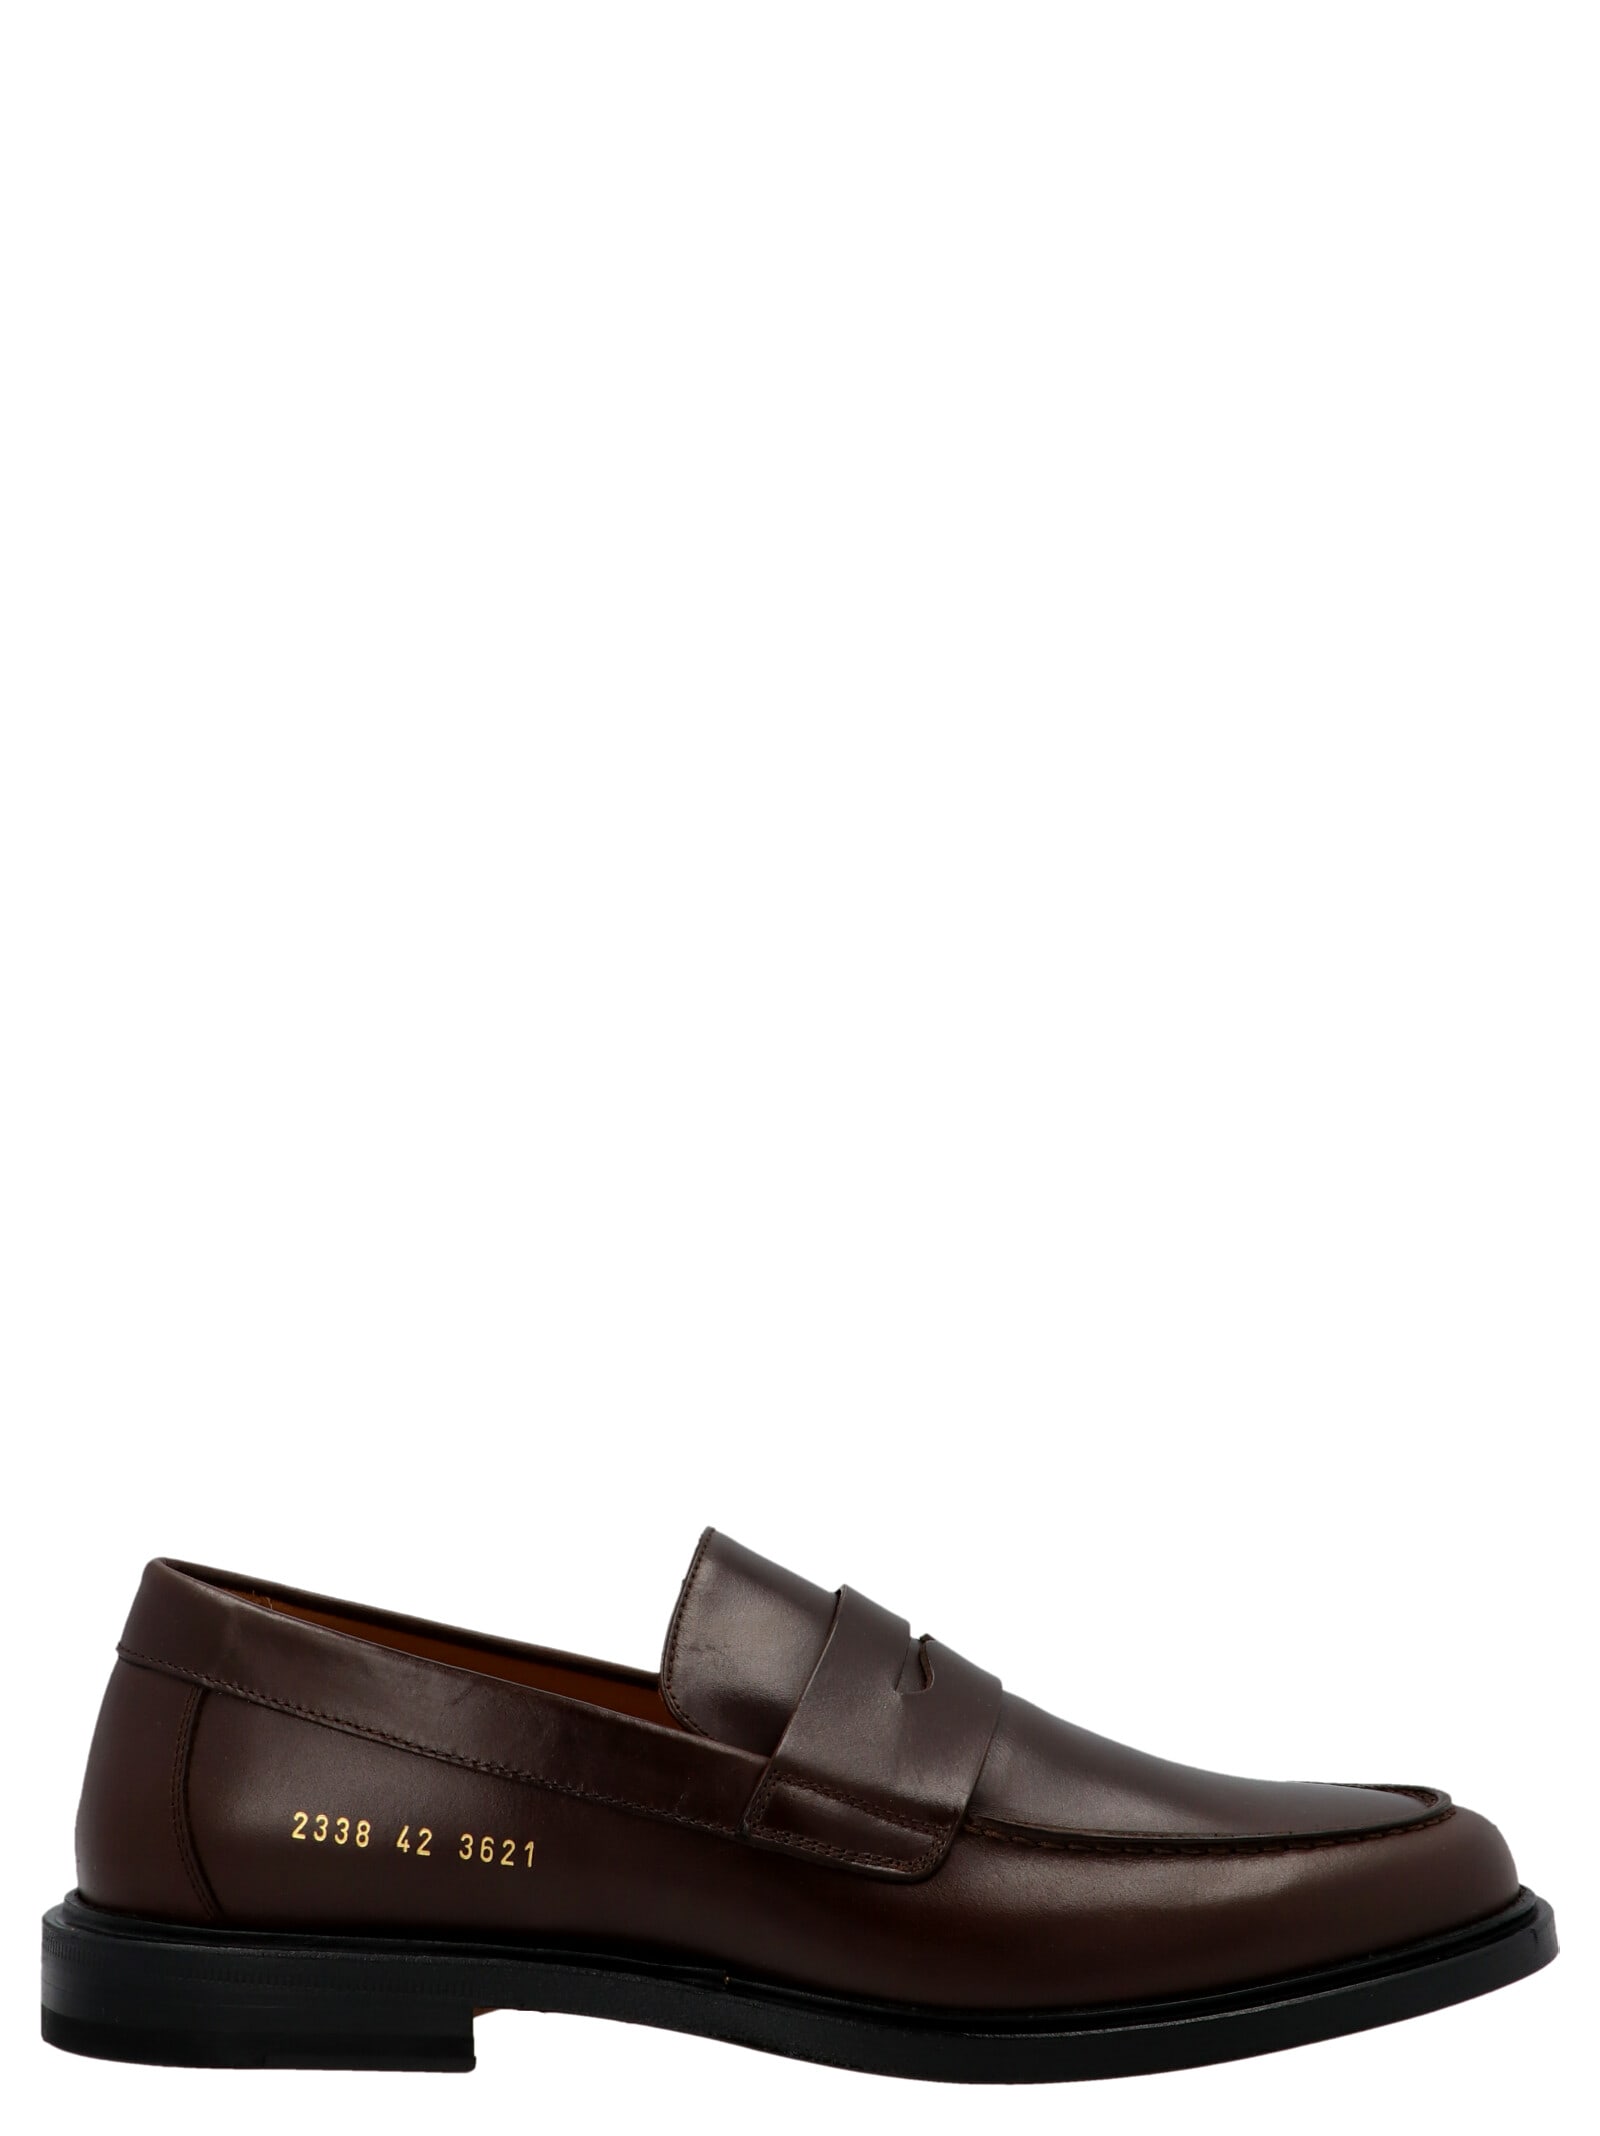 Common Projects Leather Loafers